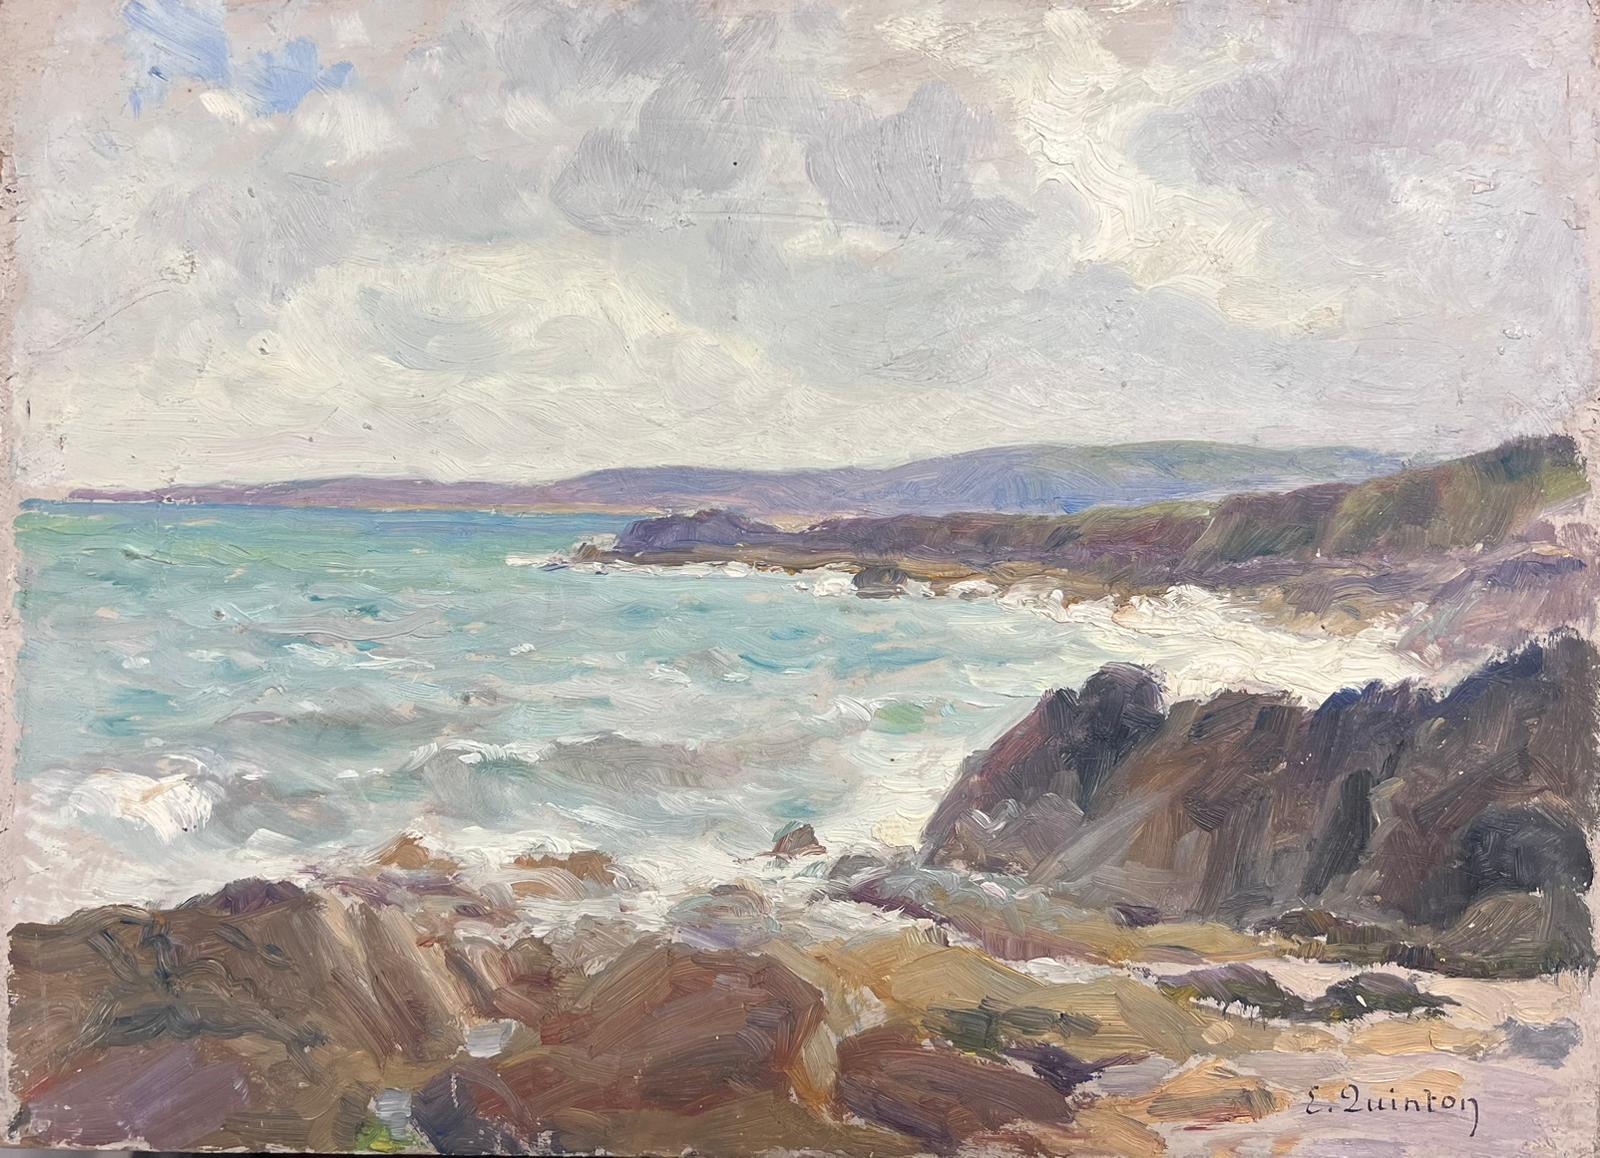 Edmond Quinton Landscape Painting - Rocky Coastline Normandy Scene 1930's French Impressionist Signed Oil Painting 